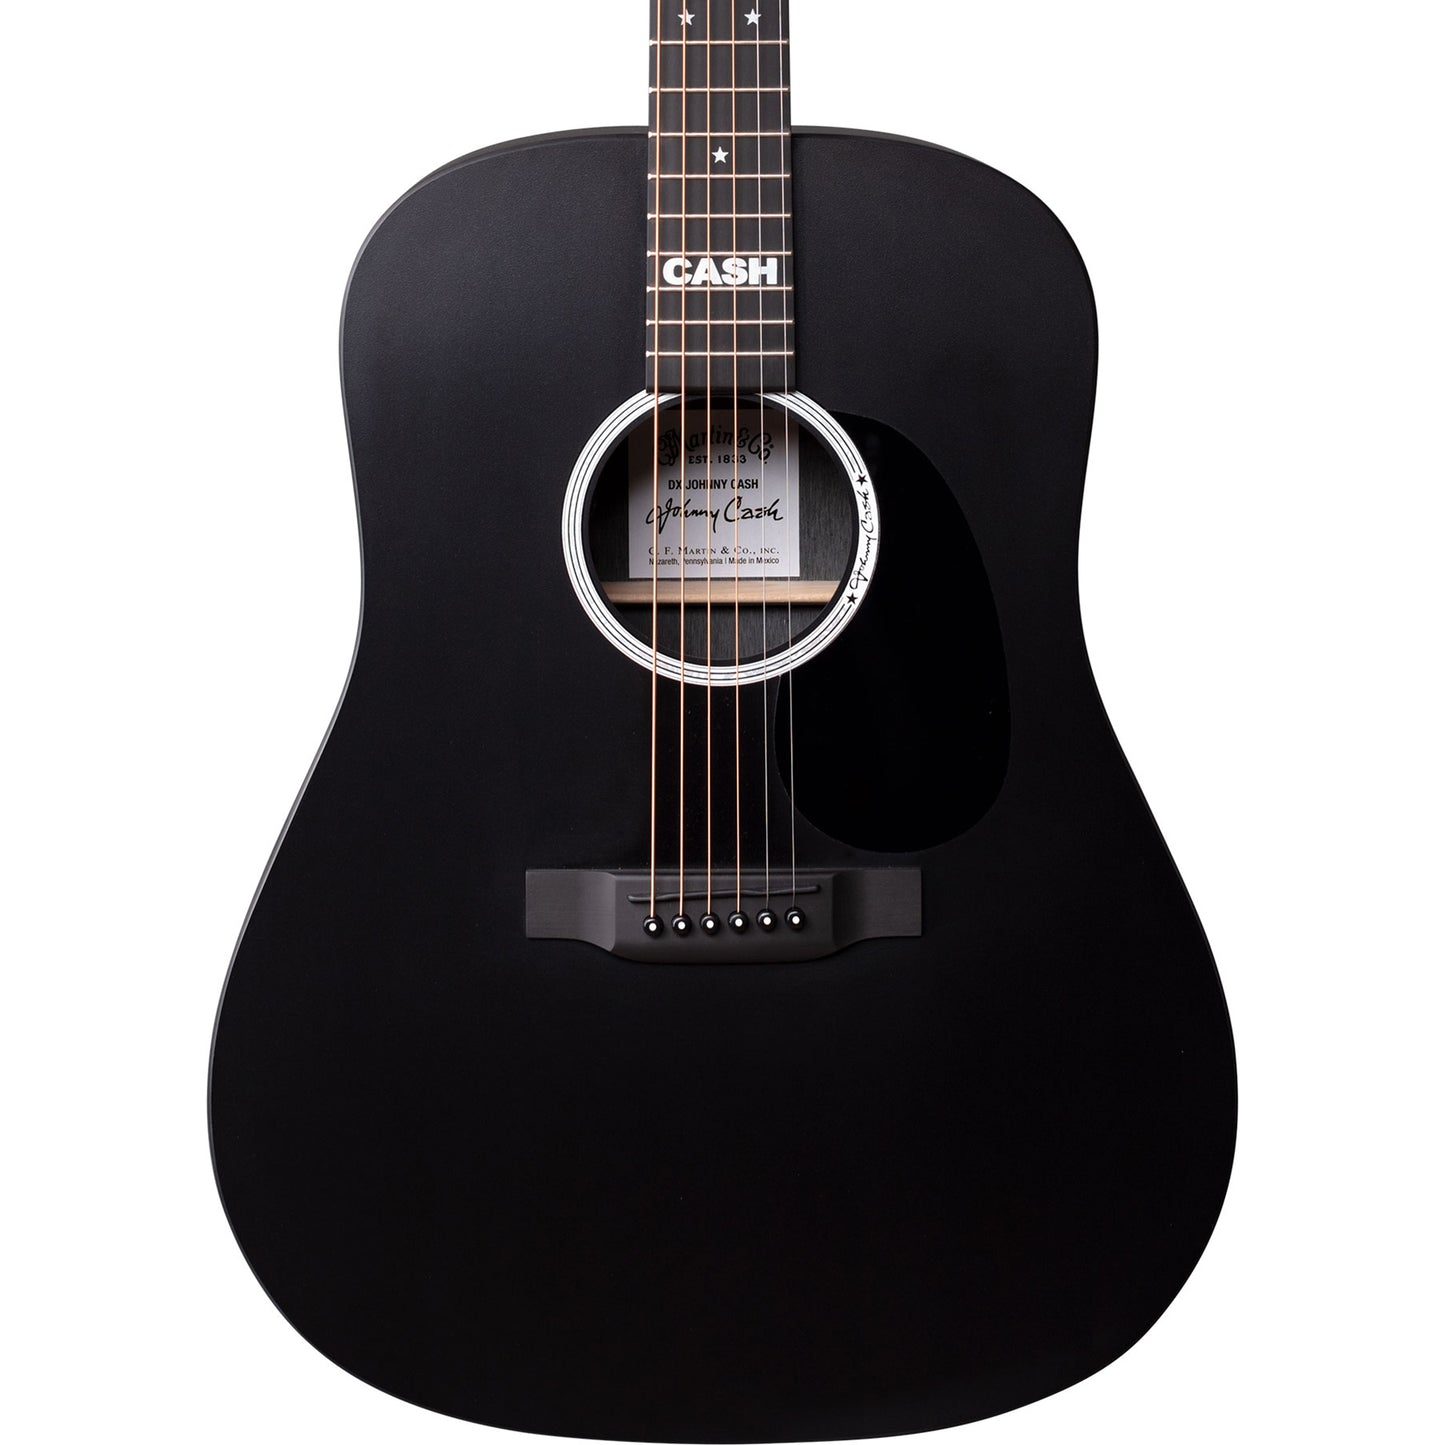 Martin DX Johnny Cash Signature X Series Acoustic Electric Guitar with Gig Bag